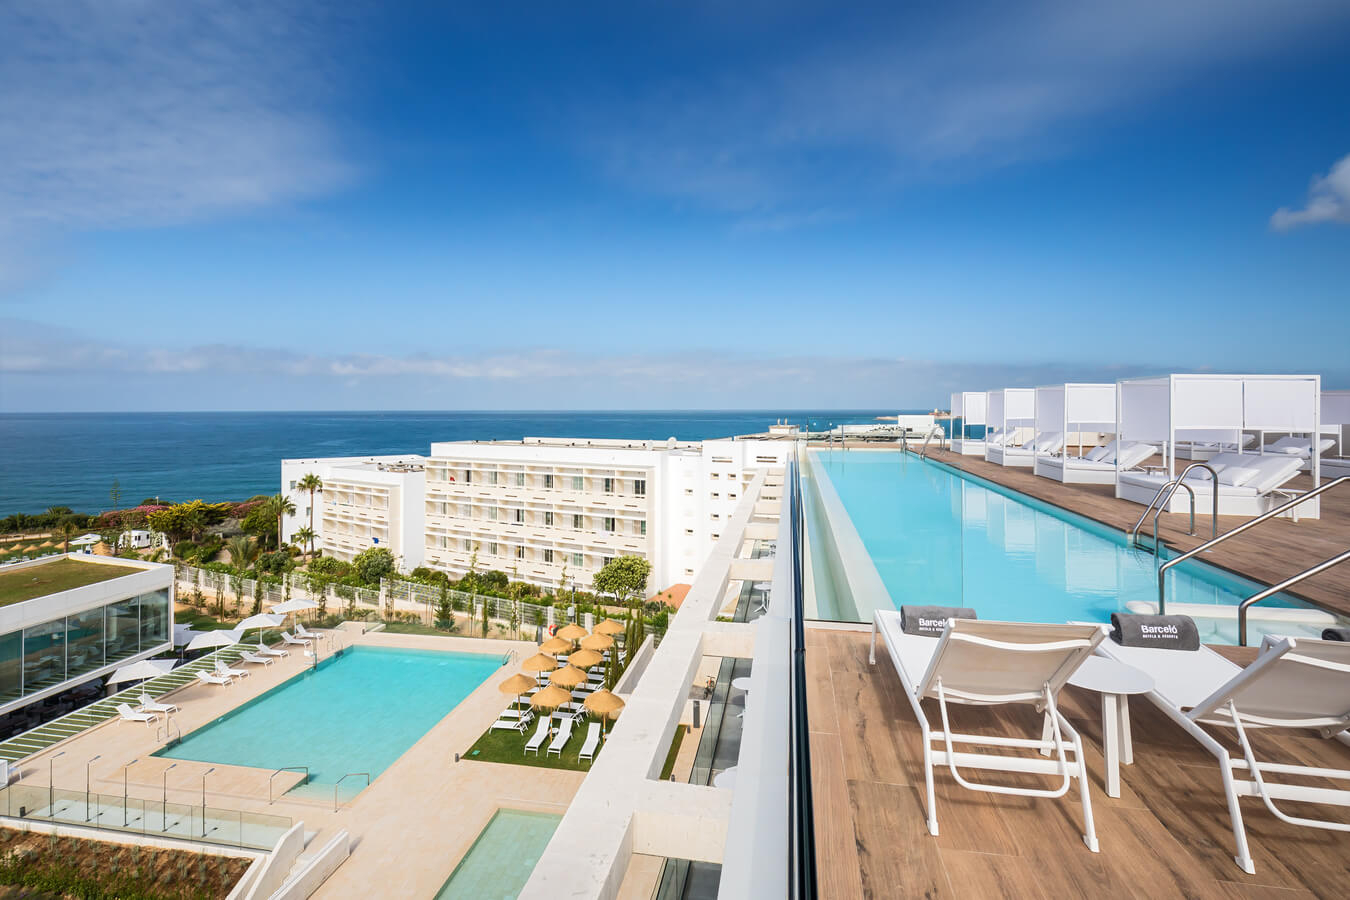 Hotels that care about saving water: The pool of Barceló Conil Playa